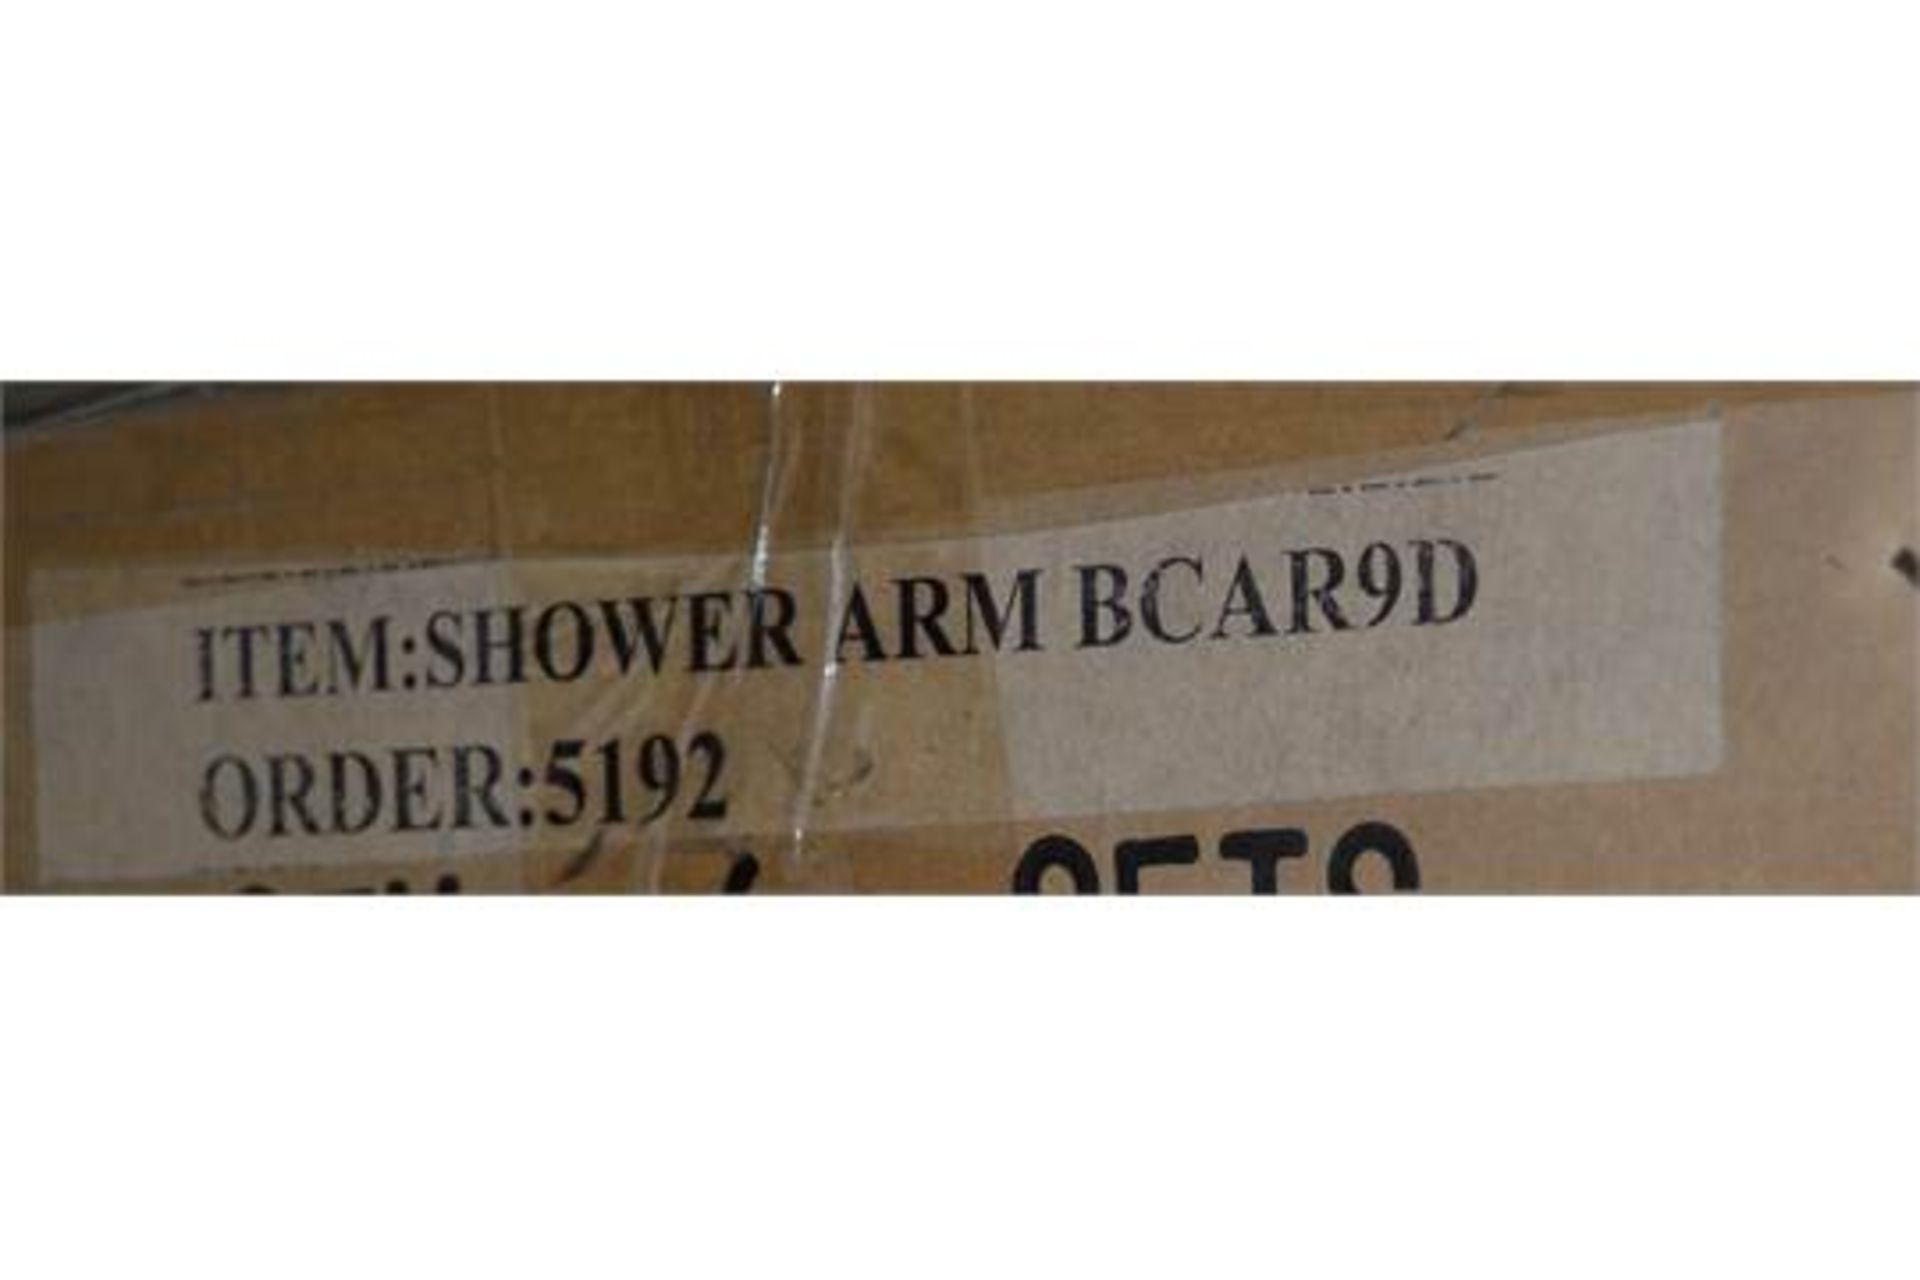 10 x Carmina Shower Arms - Solid Brass With Chrome Finish - Brand New Boxed Stock - Approx RRP £170 - Image 6 of 6